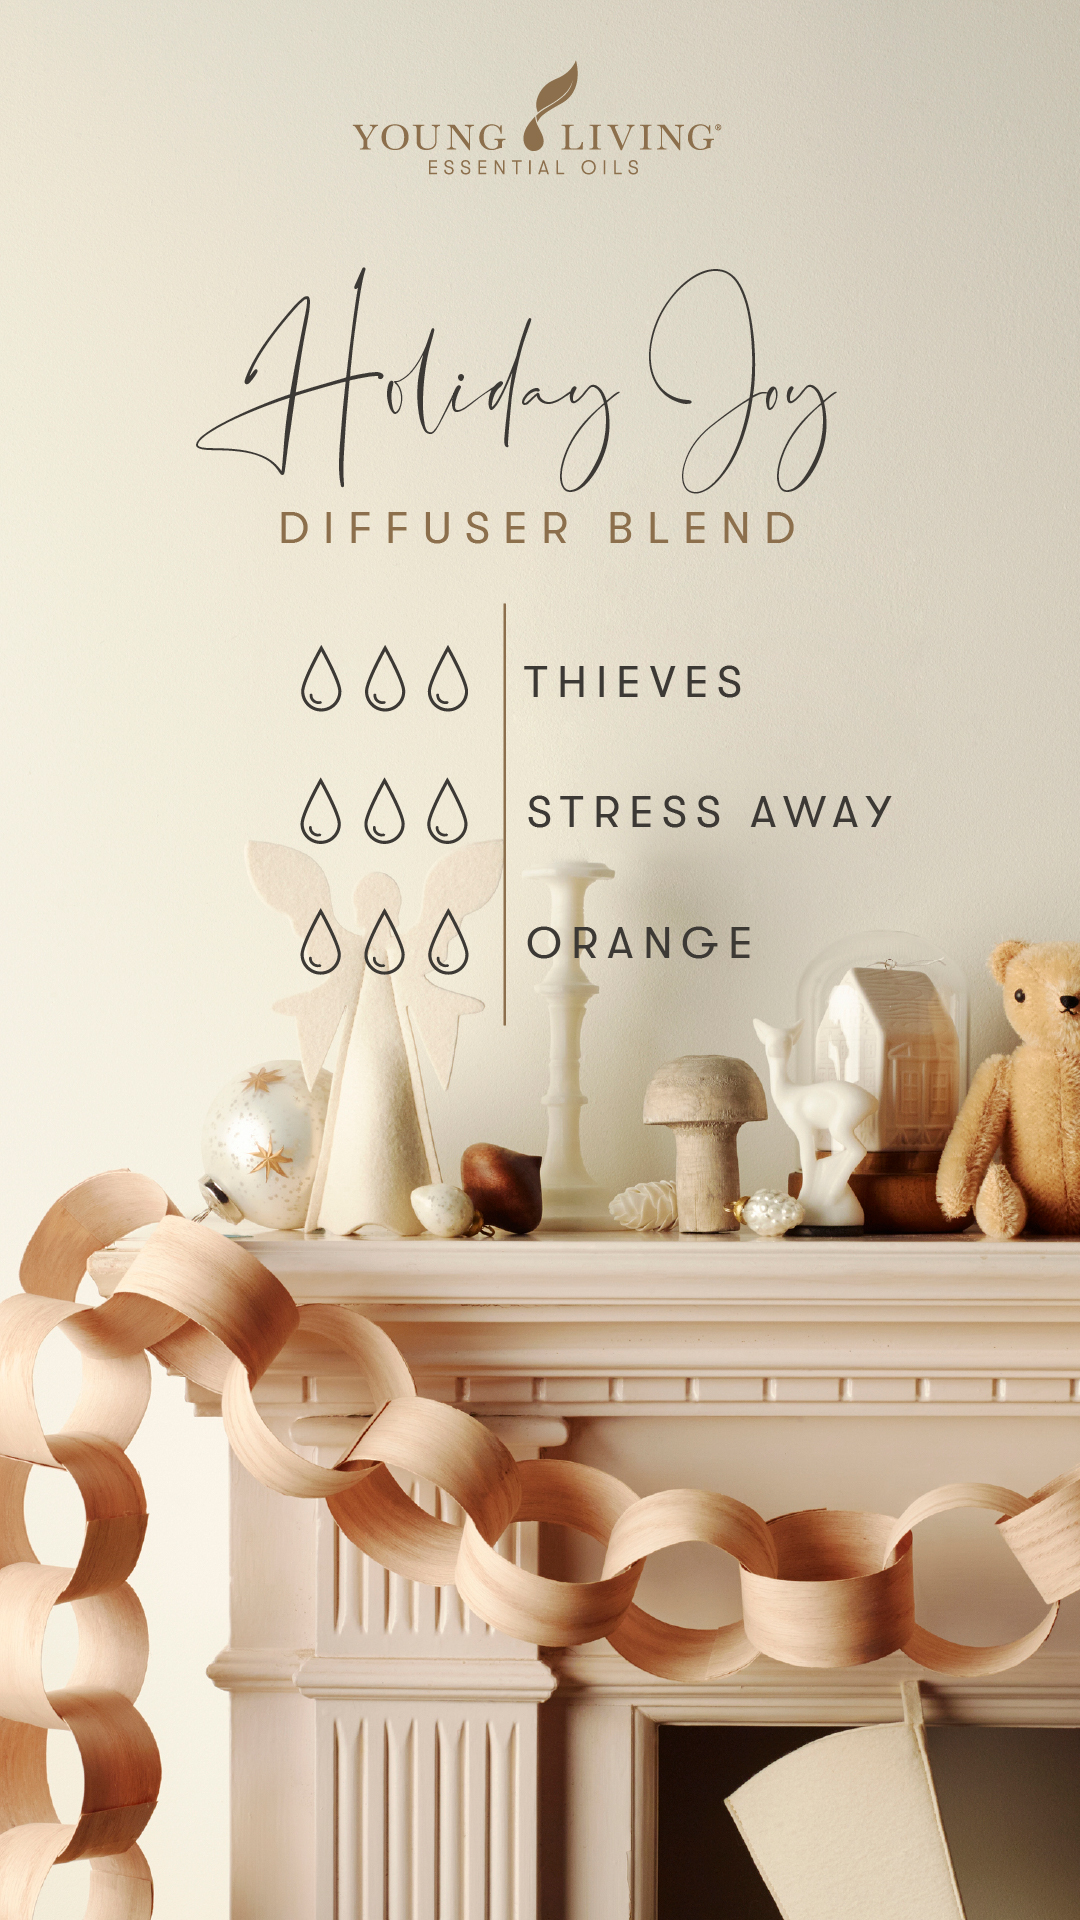 Young Living Holiday Joy essential oil diffuser blend 